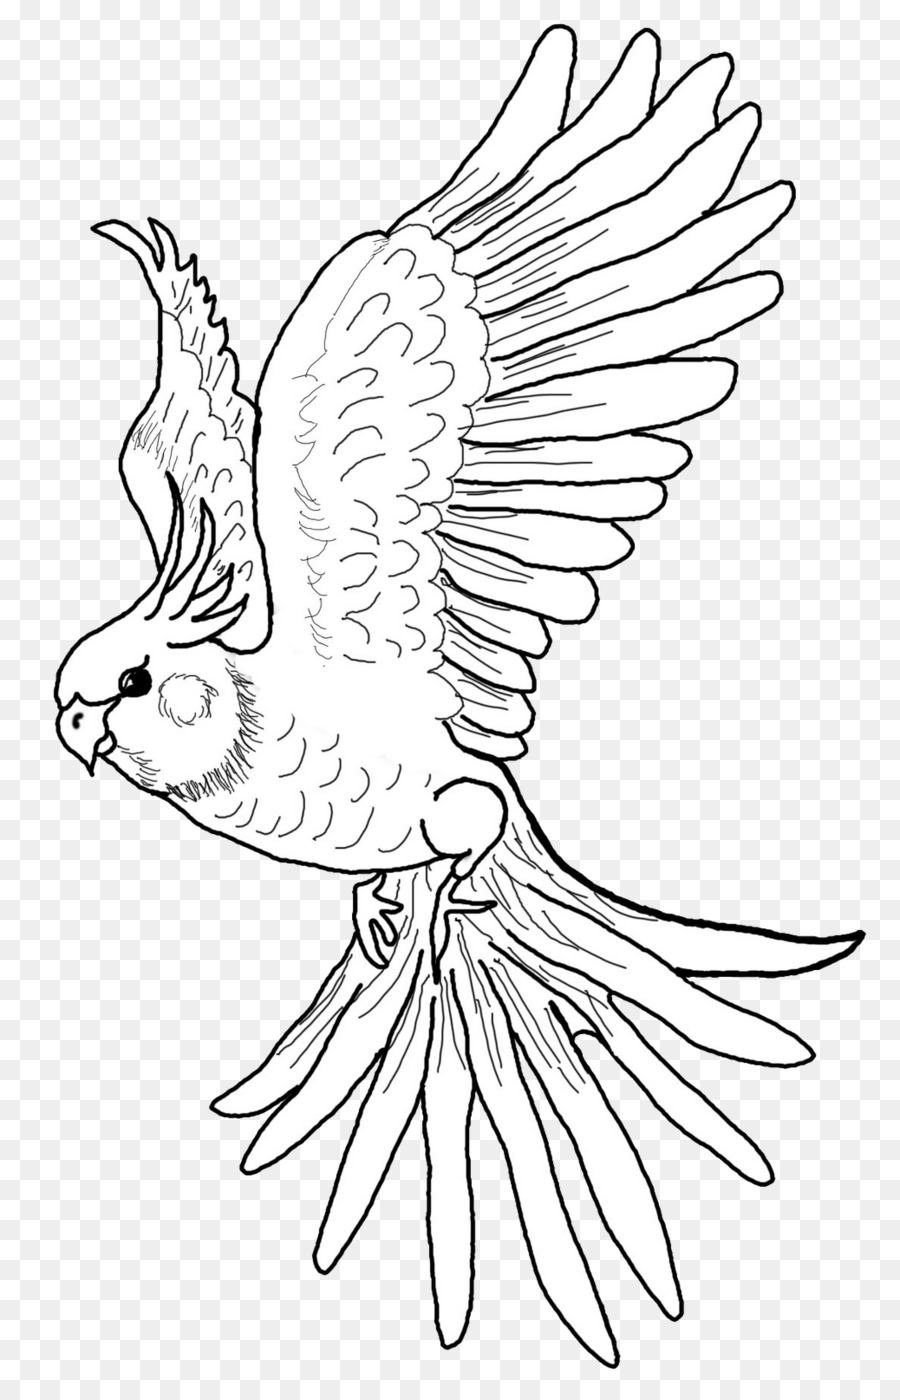 Bird line drawing png download